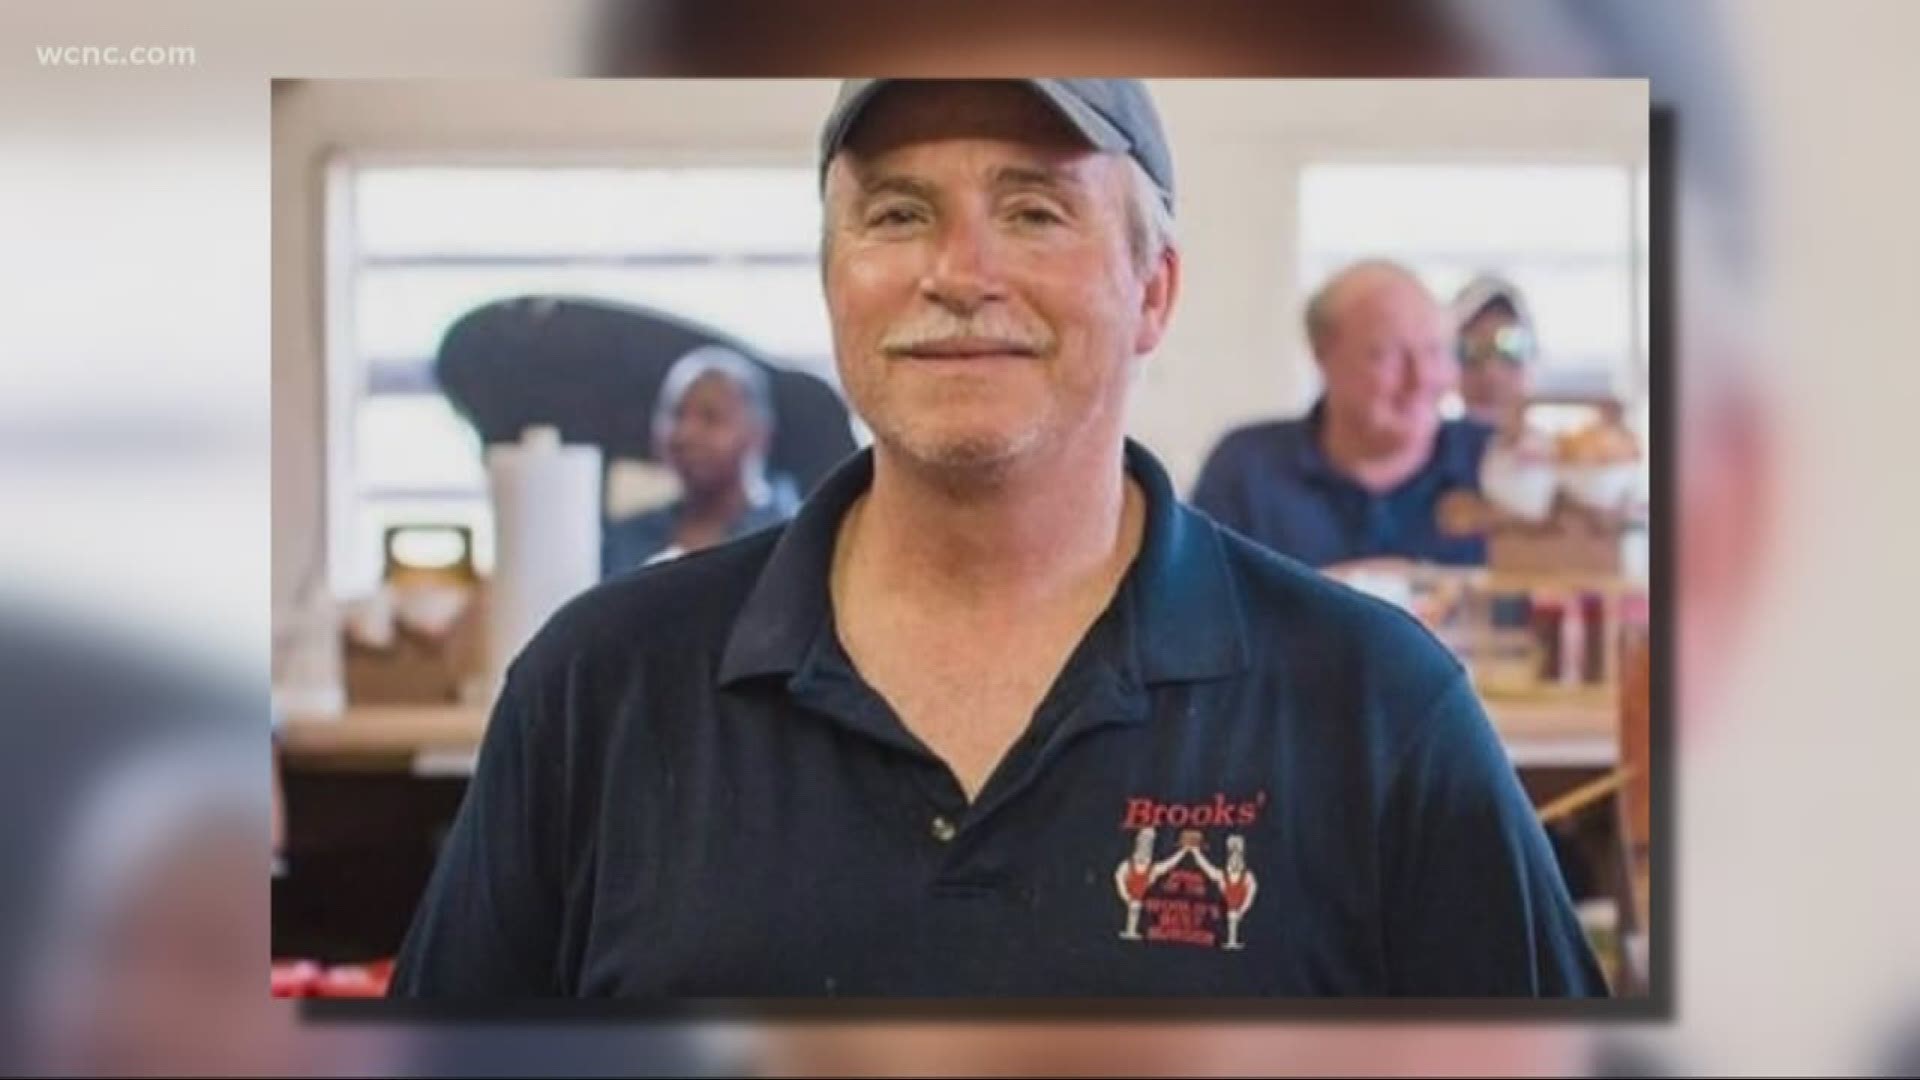 Hundreds of people showed up on Saturday to pay their respects to the beloved co-owner of Brook’s Sandwich House in NoDa.